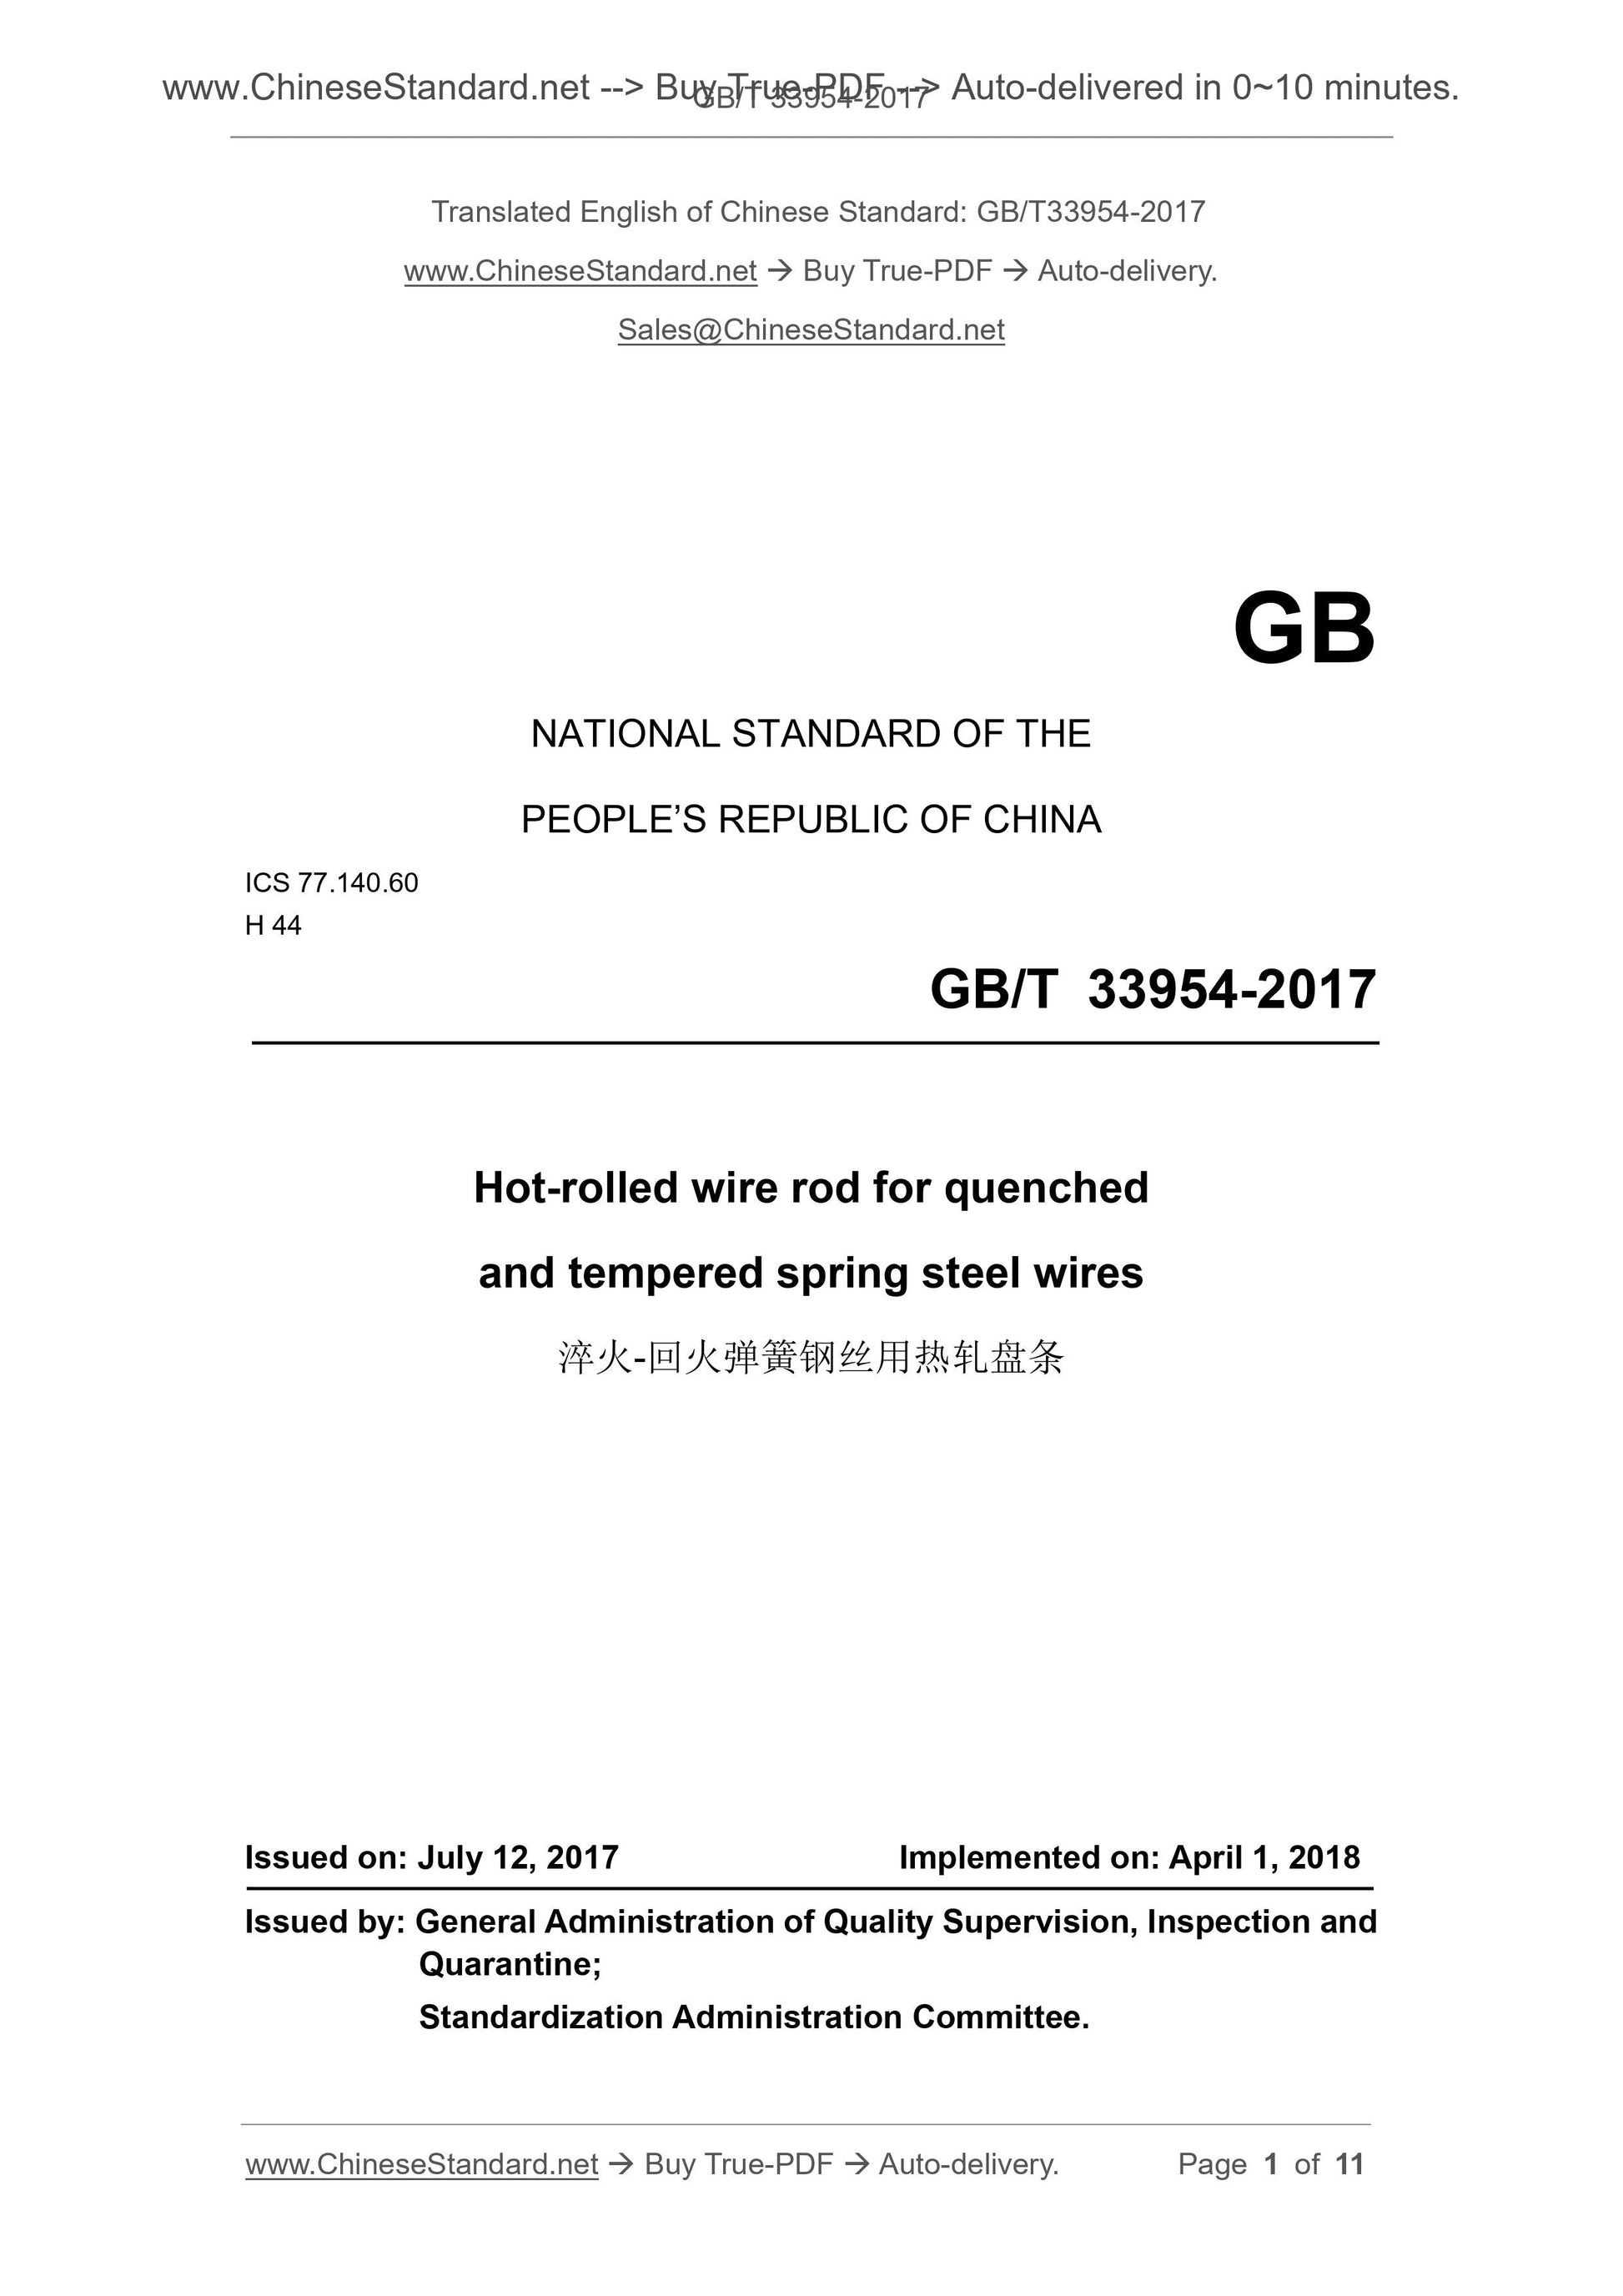 GB/T 33954-2017 Page 1